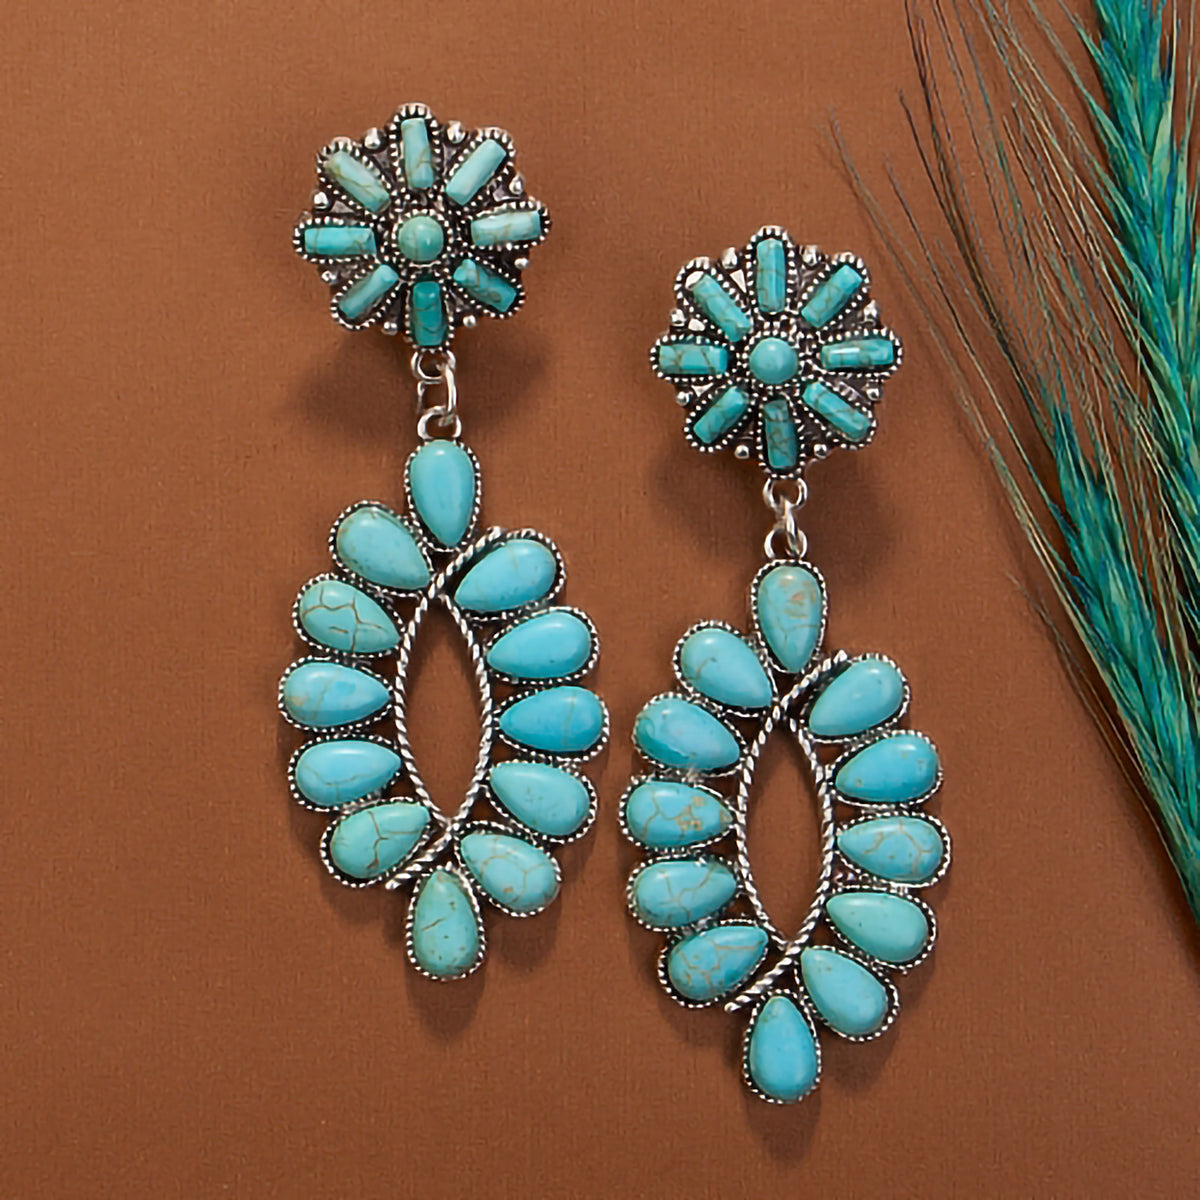 734013 - Squash Blossom Earrings - Turquoise & Silver - Fashion Jewelry Wholesale